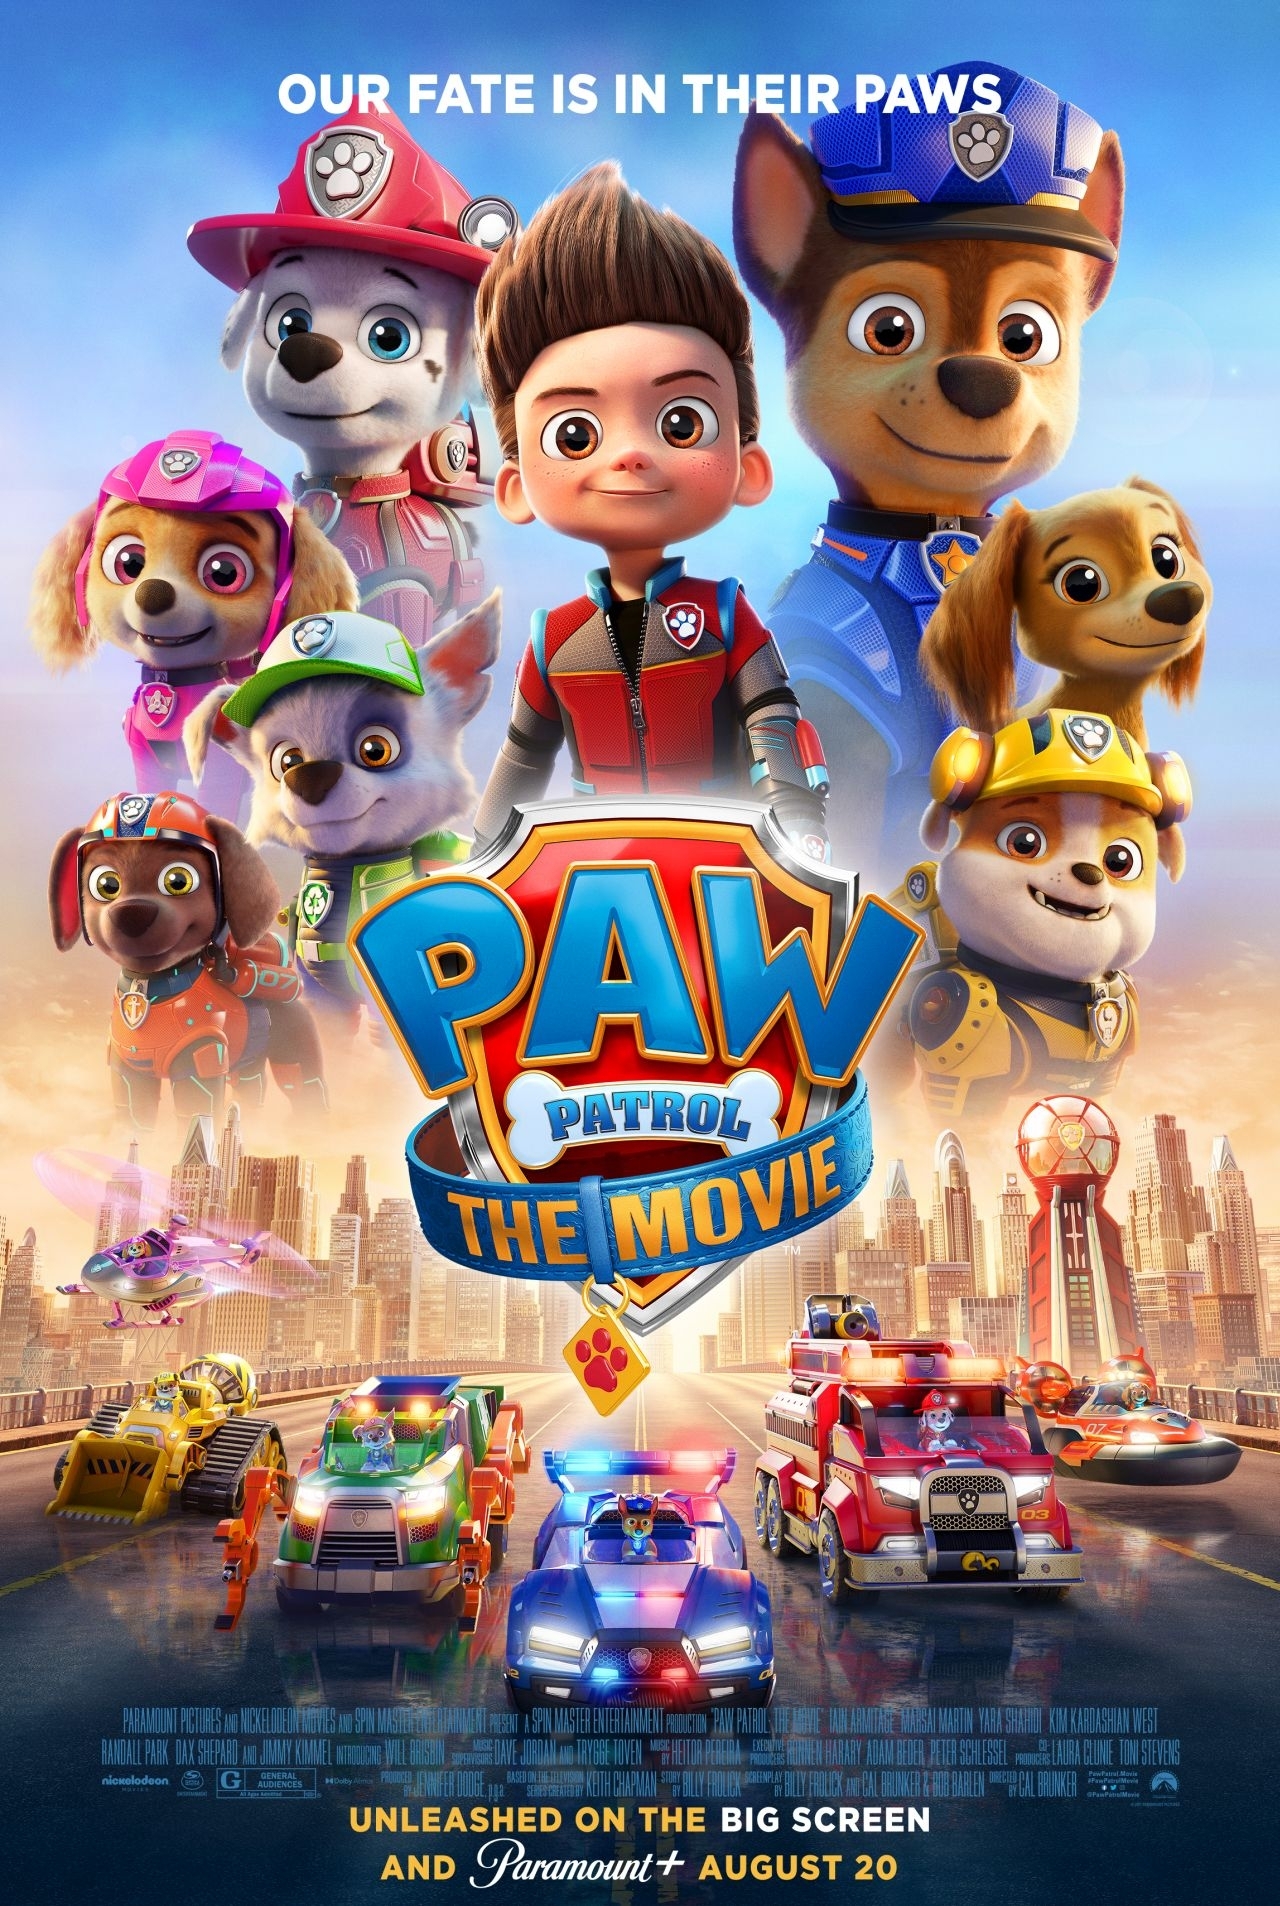 Paramount+ the Dogs Out in a 'Paw Patrol' Summer! | Animation